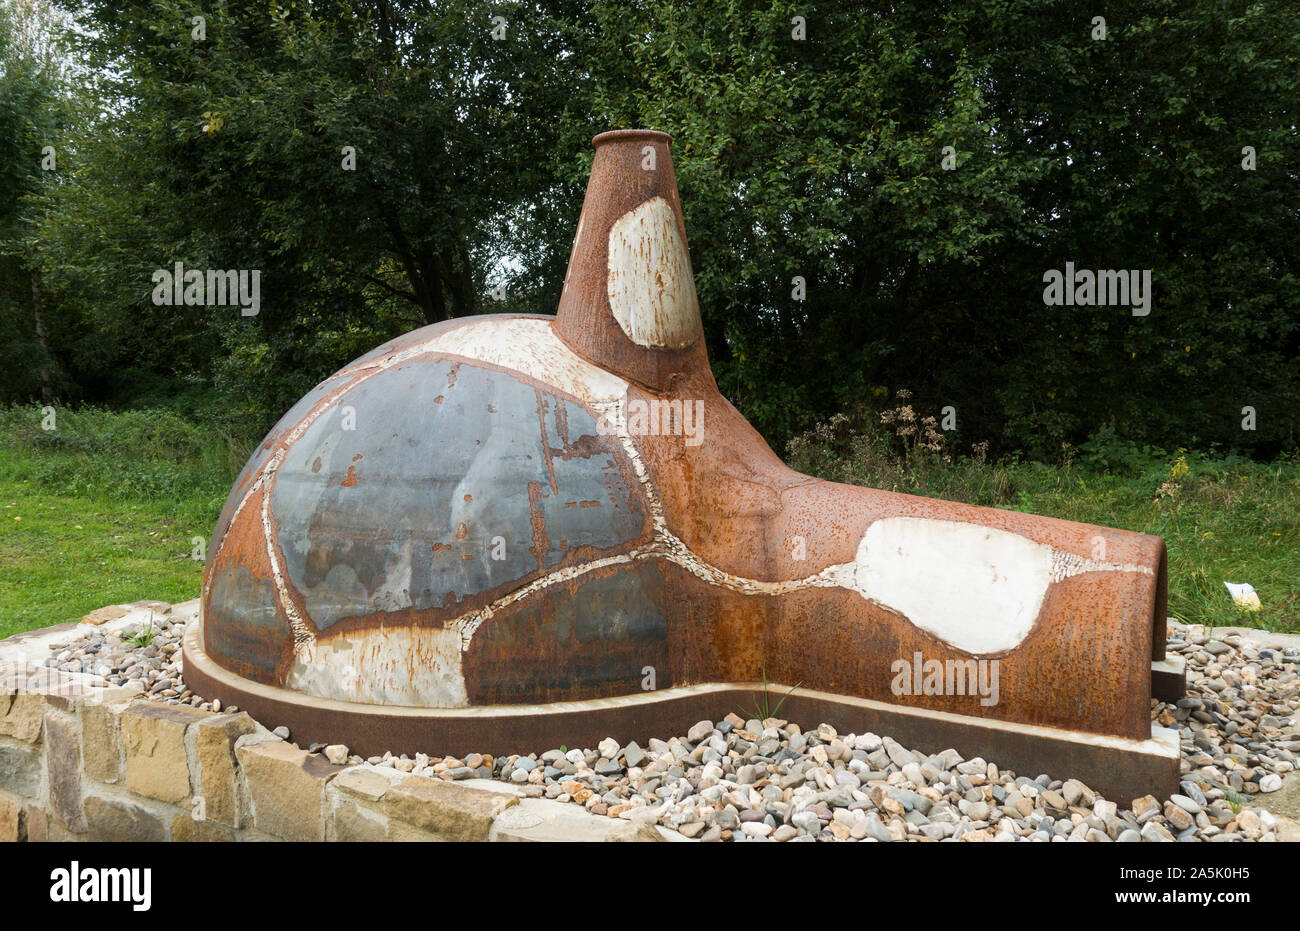 Replica of an Ancient medieval pottery oven, South of Netherlands. Stock Photo